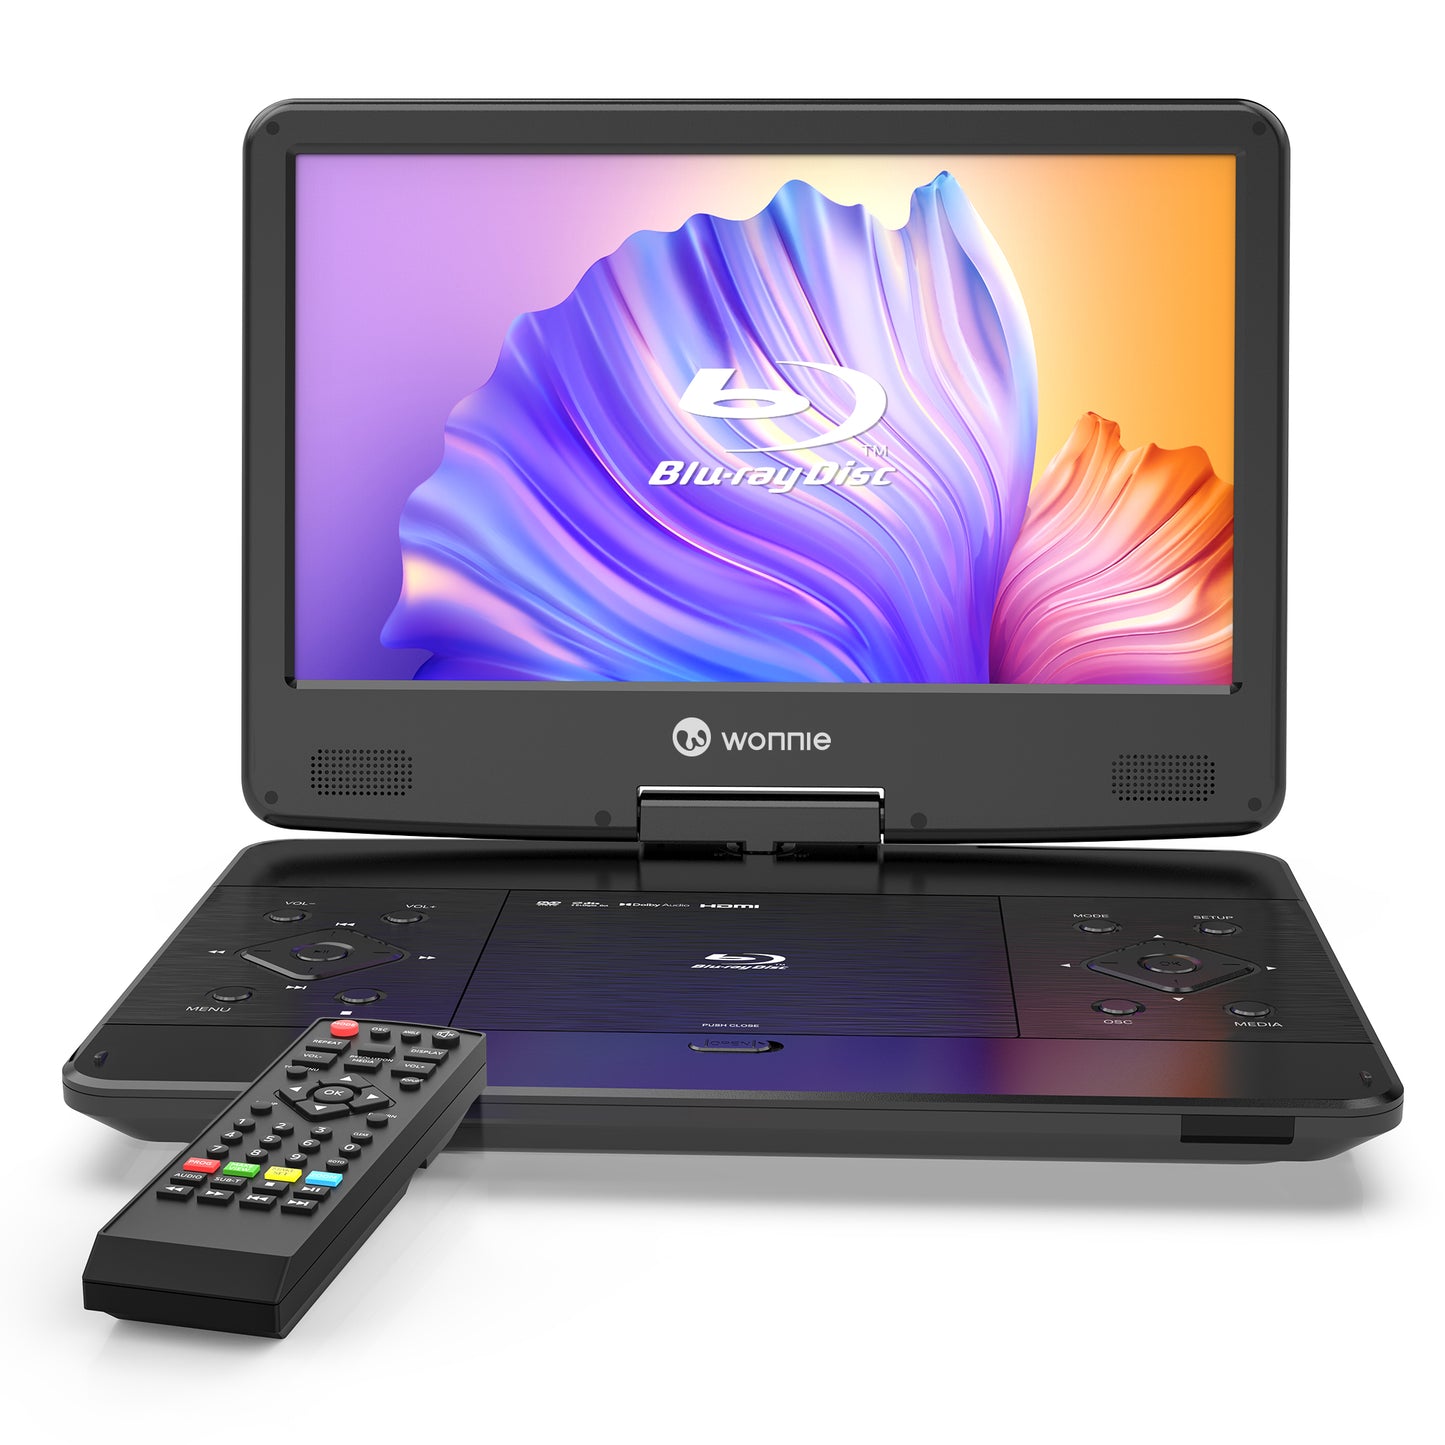 WONNIE Portable Blu Ray DVD Player, 16.9 inch DVD Player with 14.1" 1080p HD Screen, Blu Ray Players built in 5000mAh Battery, Supports HDMI Output, Dolby Audio, Last Memory, USB/SD Card, AV in